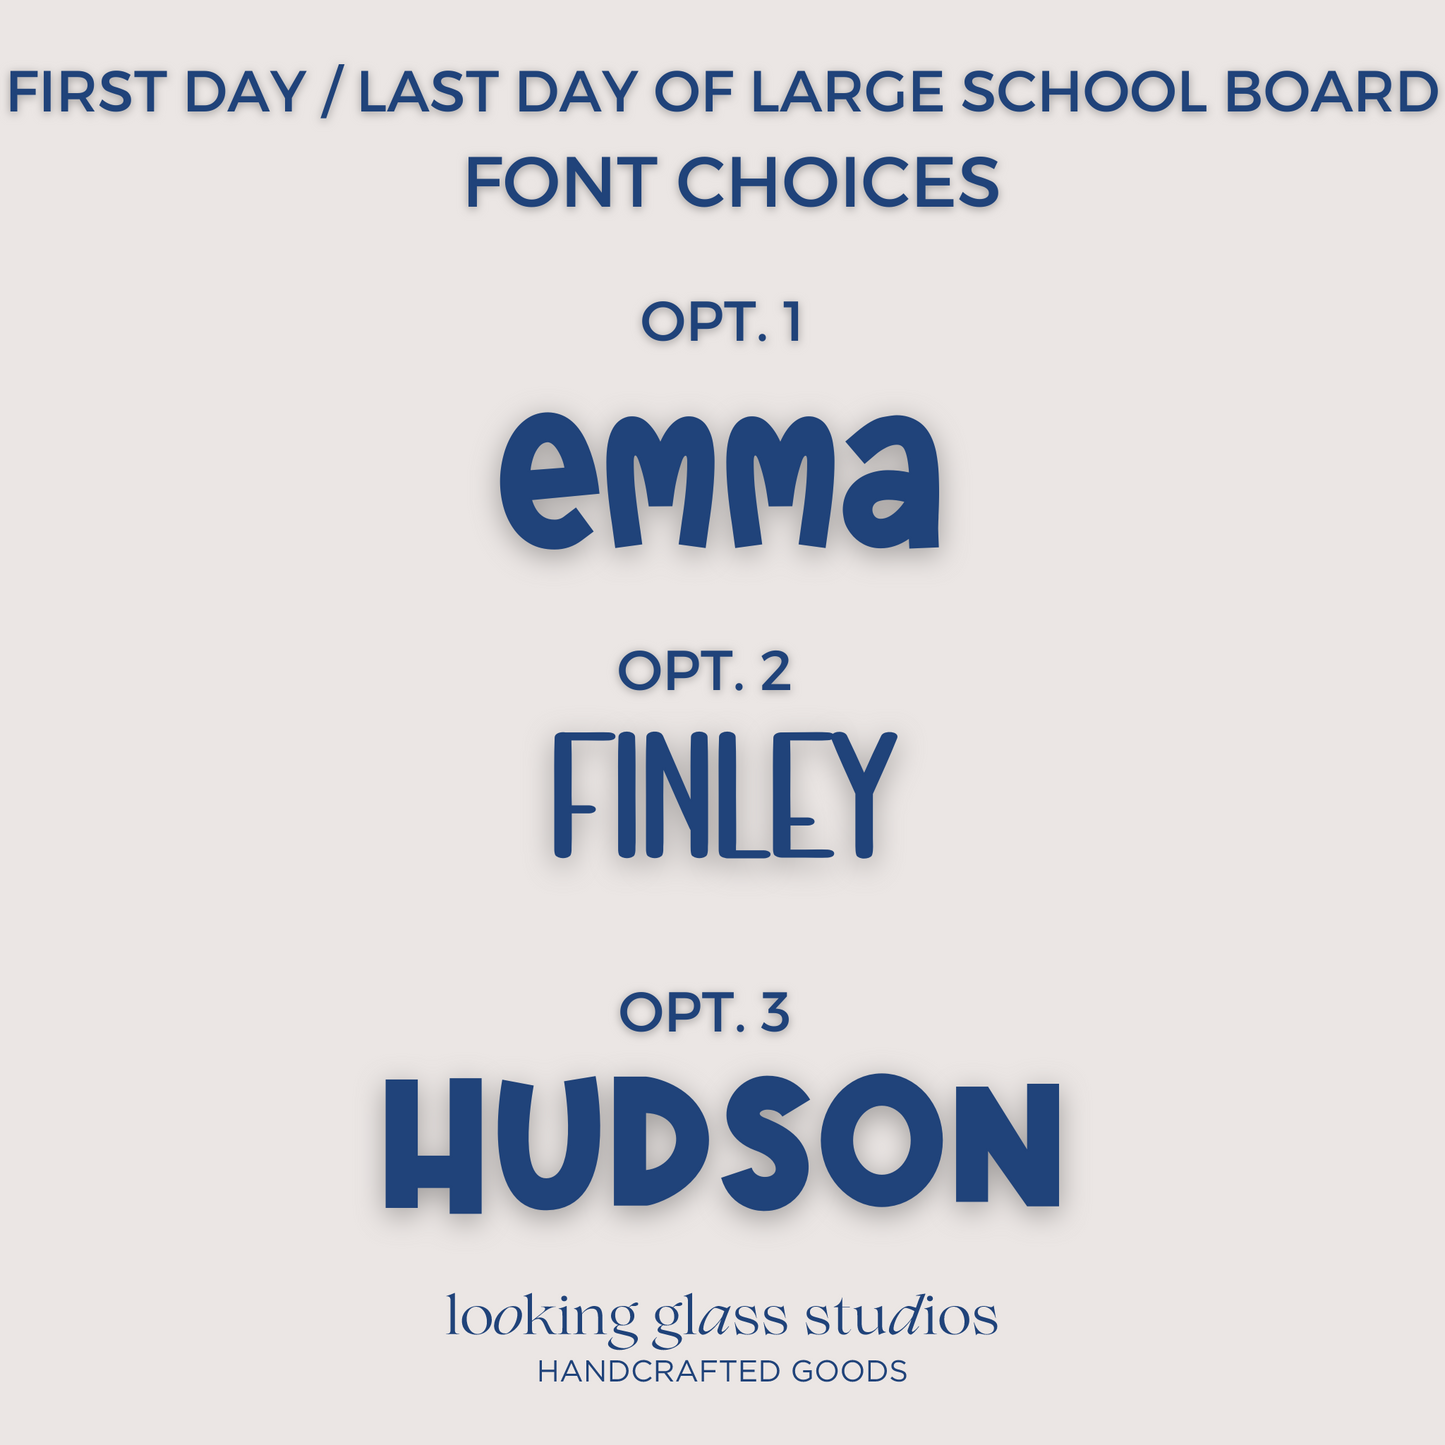 FIRST DAY / LAST DAY OF SCHOOL BOARD LARGE